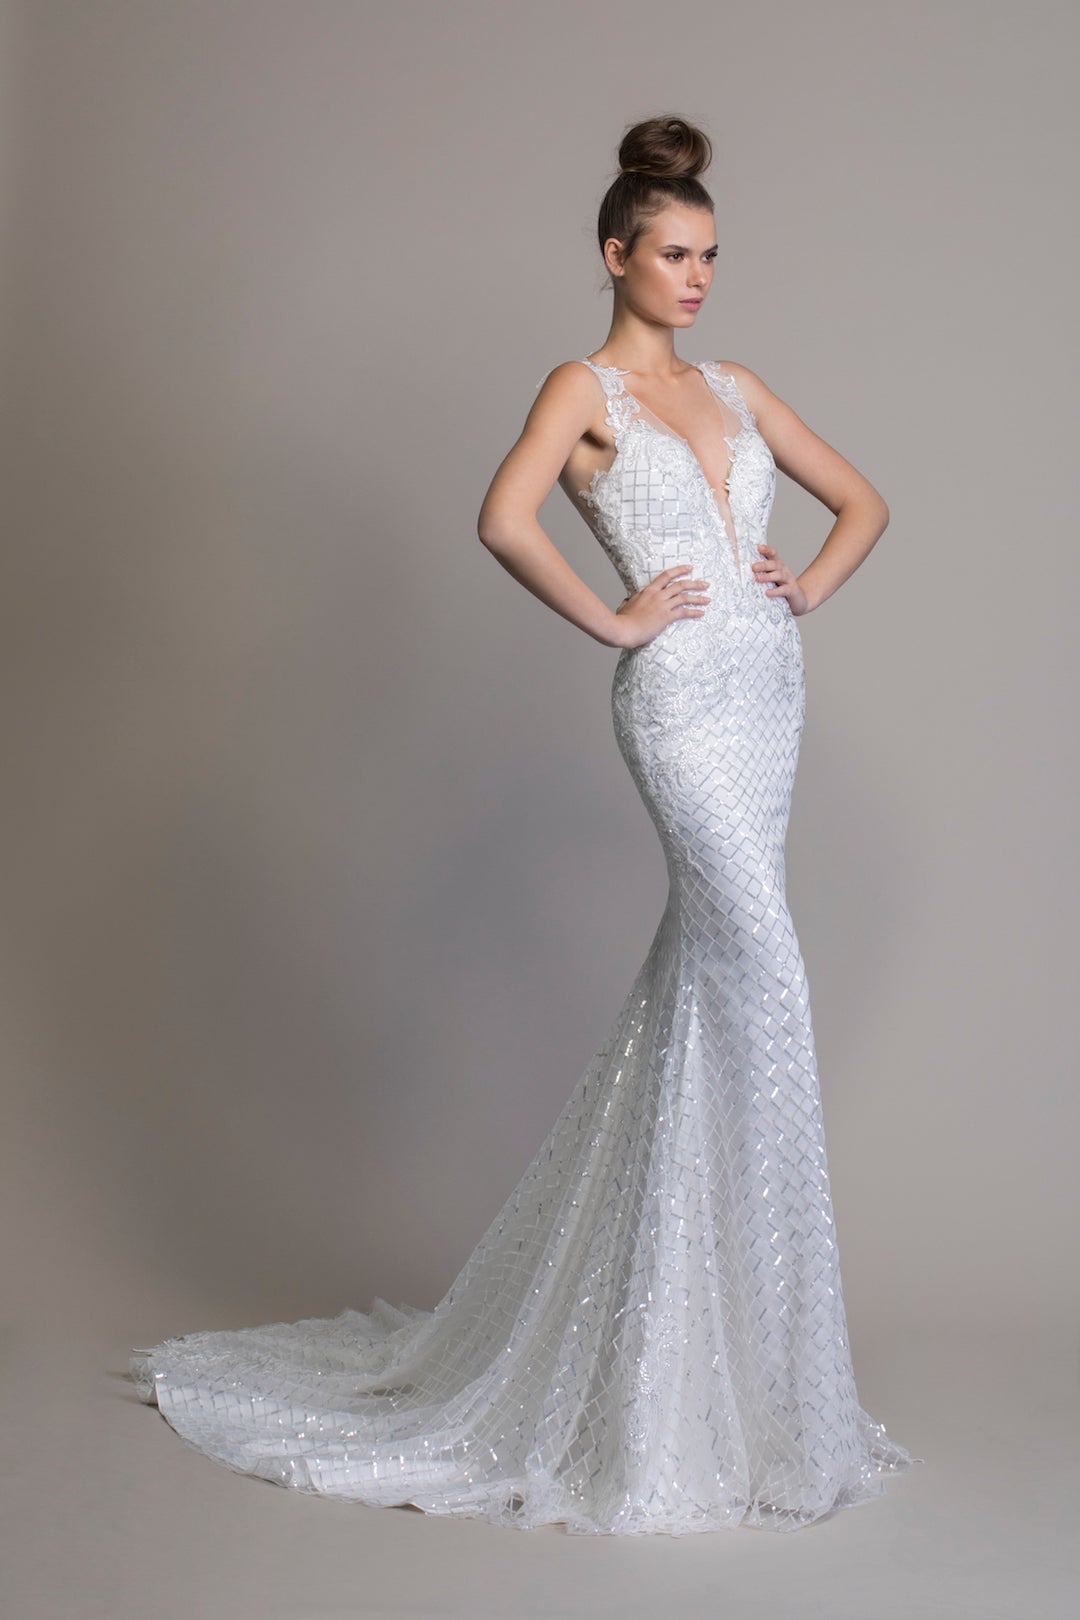 Pnina Tornai's new LOVE 2020 Collection is out! This is style 14754